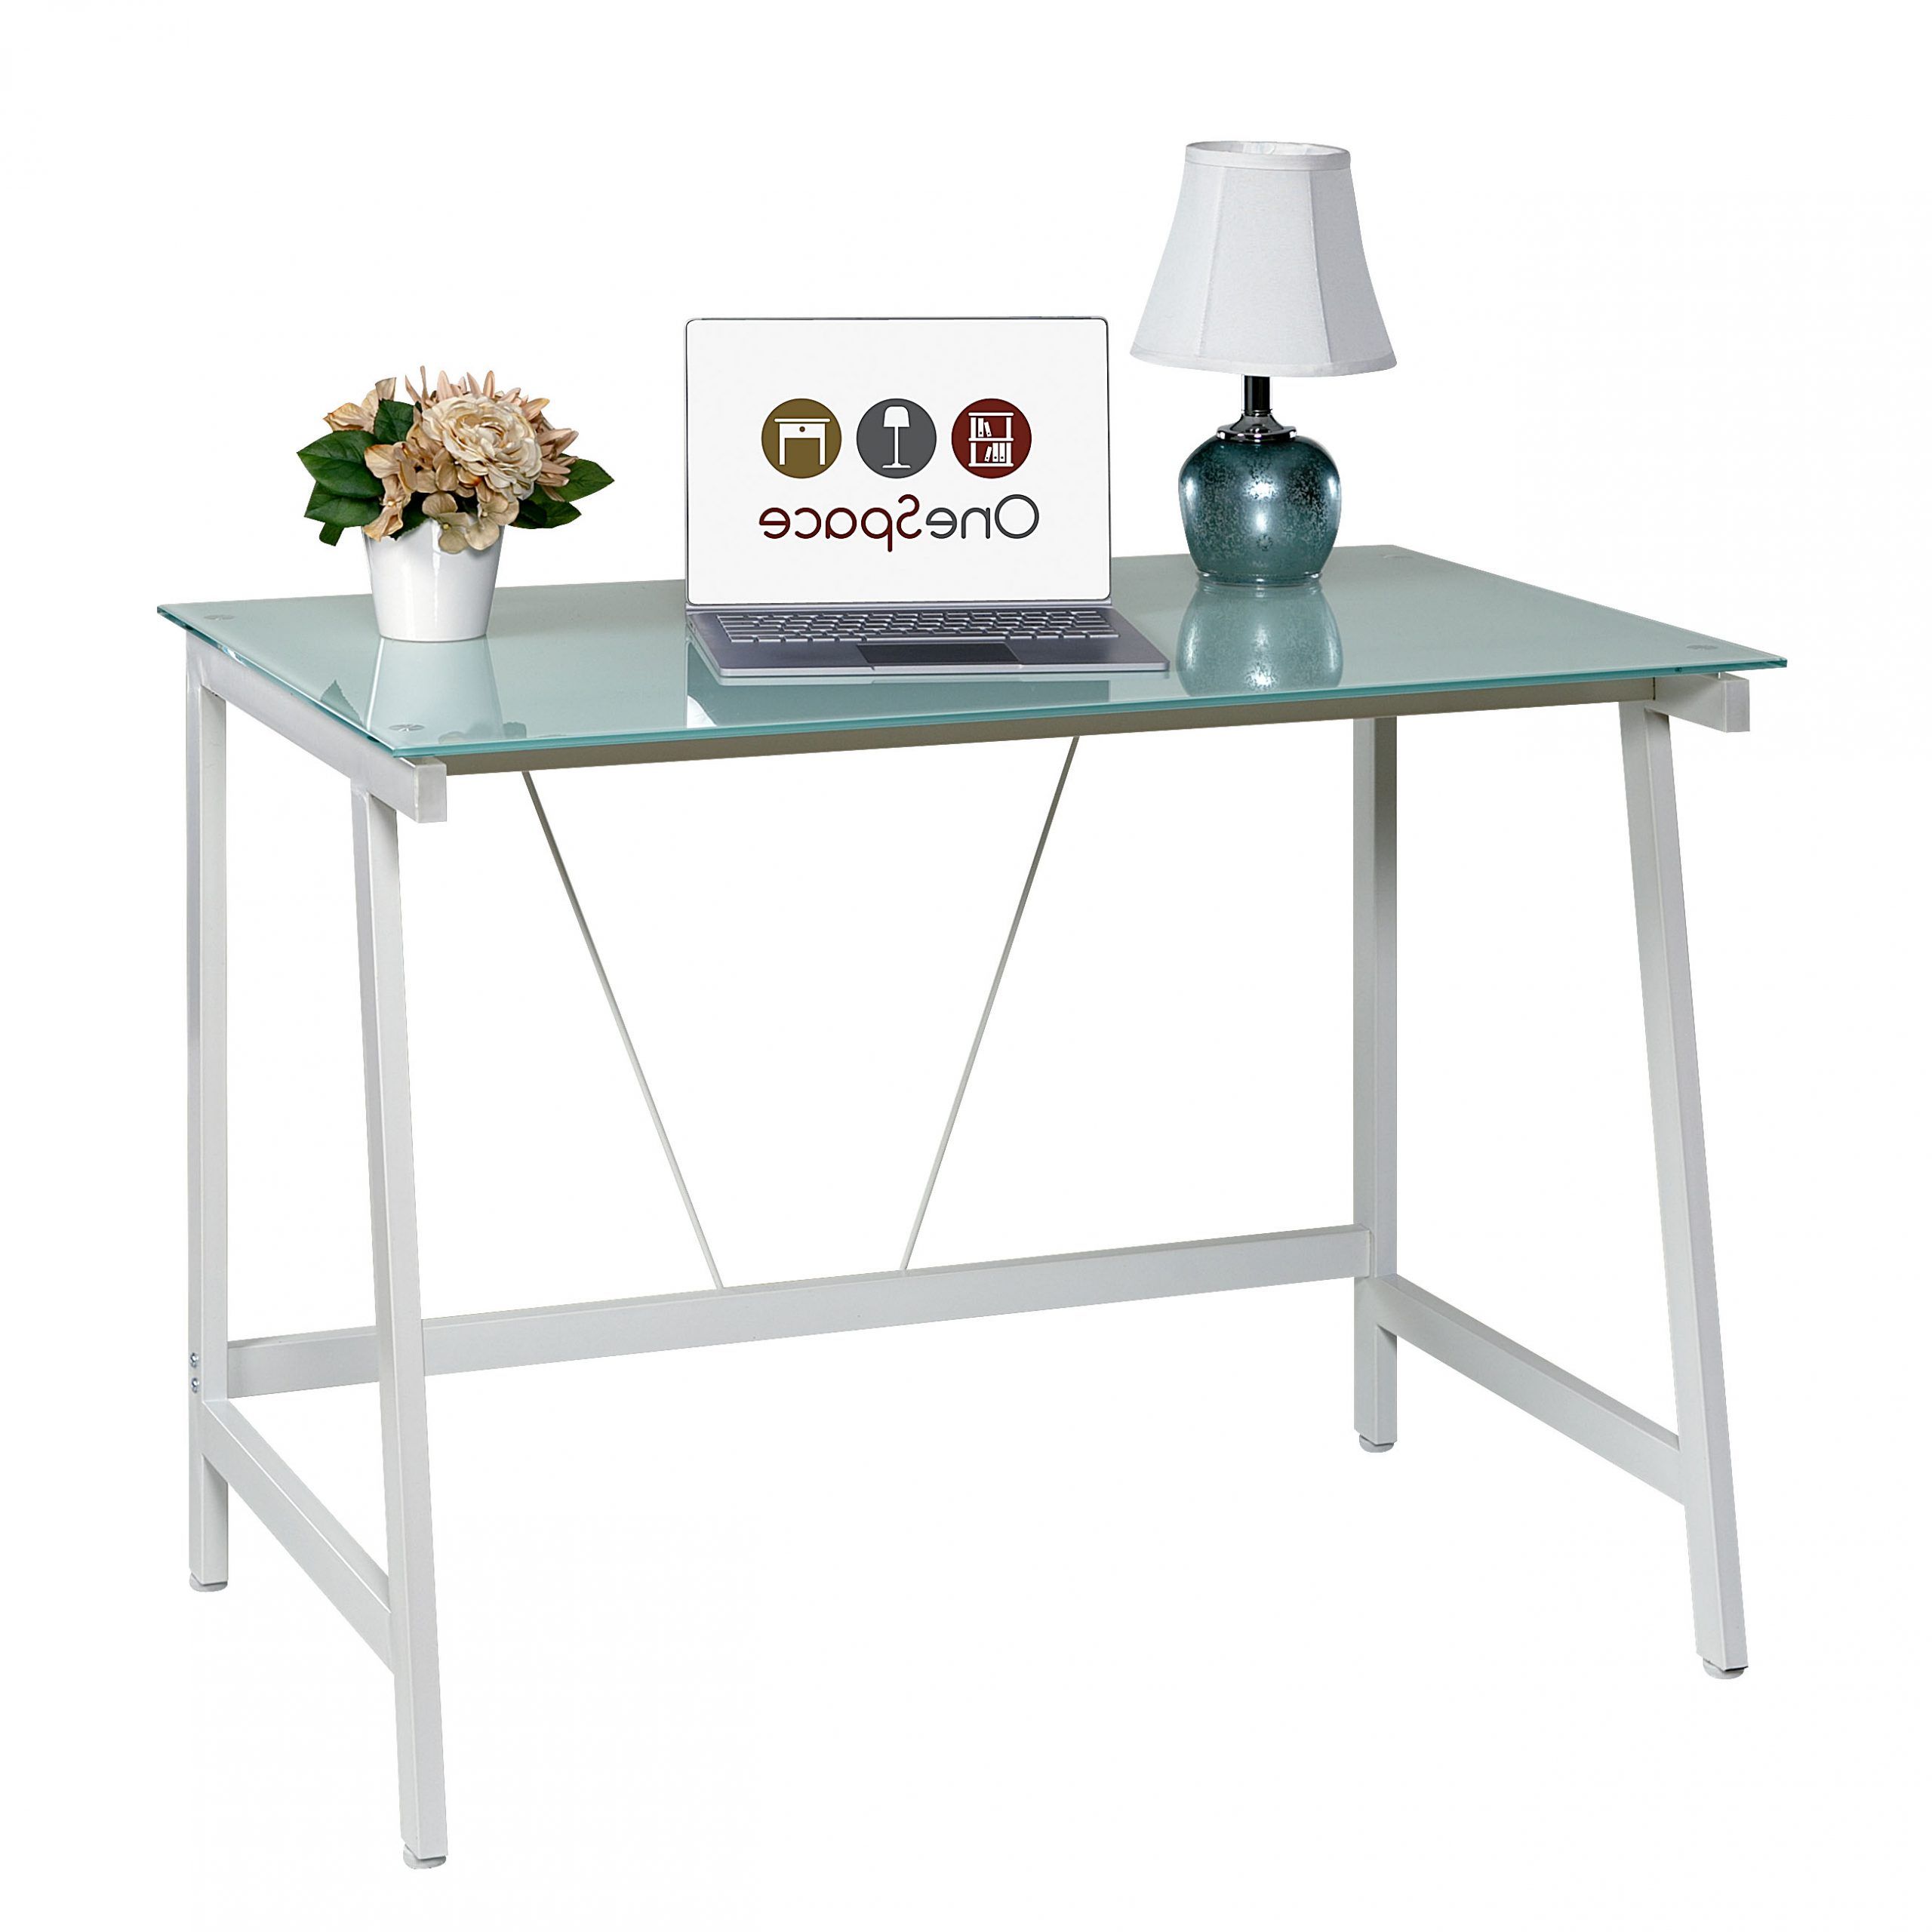 Famous Onespace 50 Hd0107 Contemporary Glass Writing Desk, Steel Frame, White Inside Glass And Walnut Modern Writing Desks (View 1 of 15)